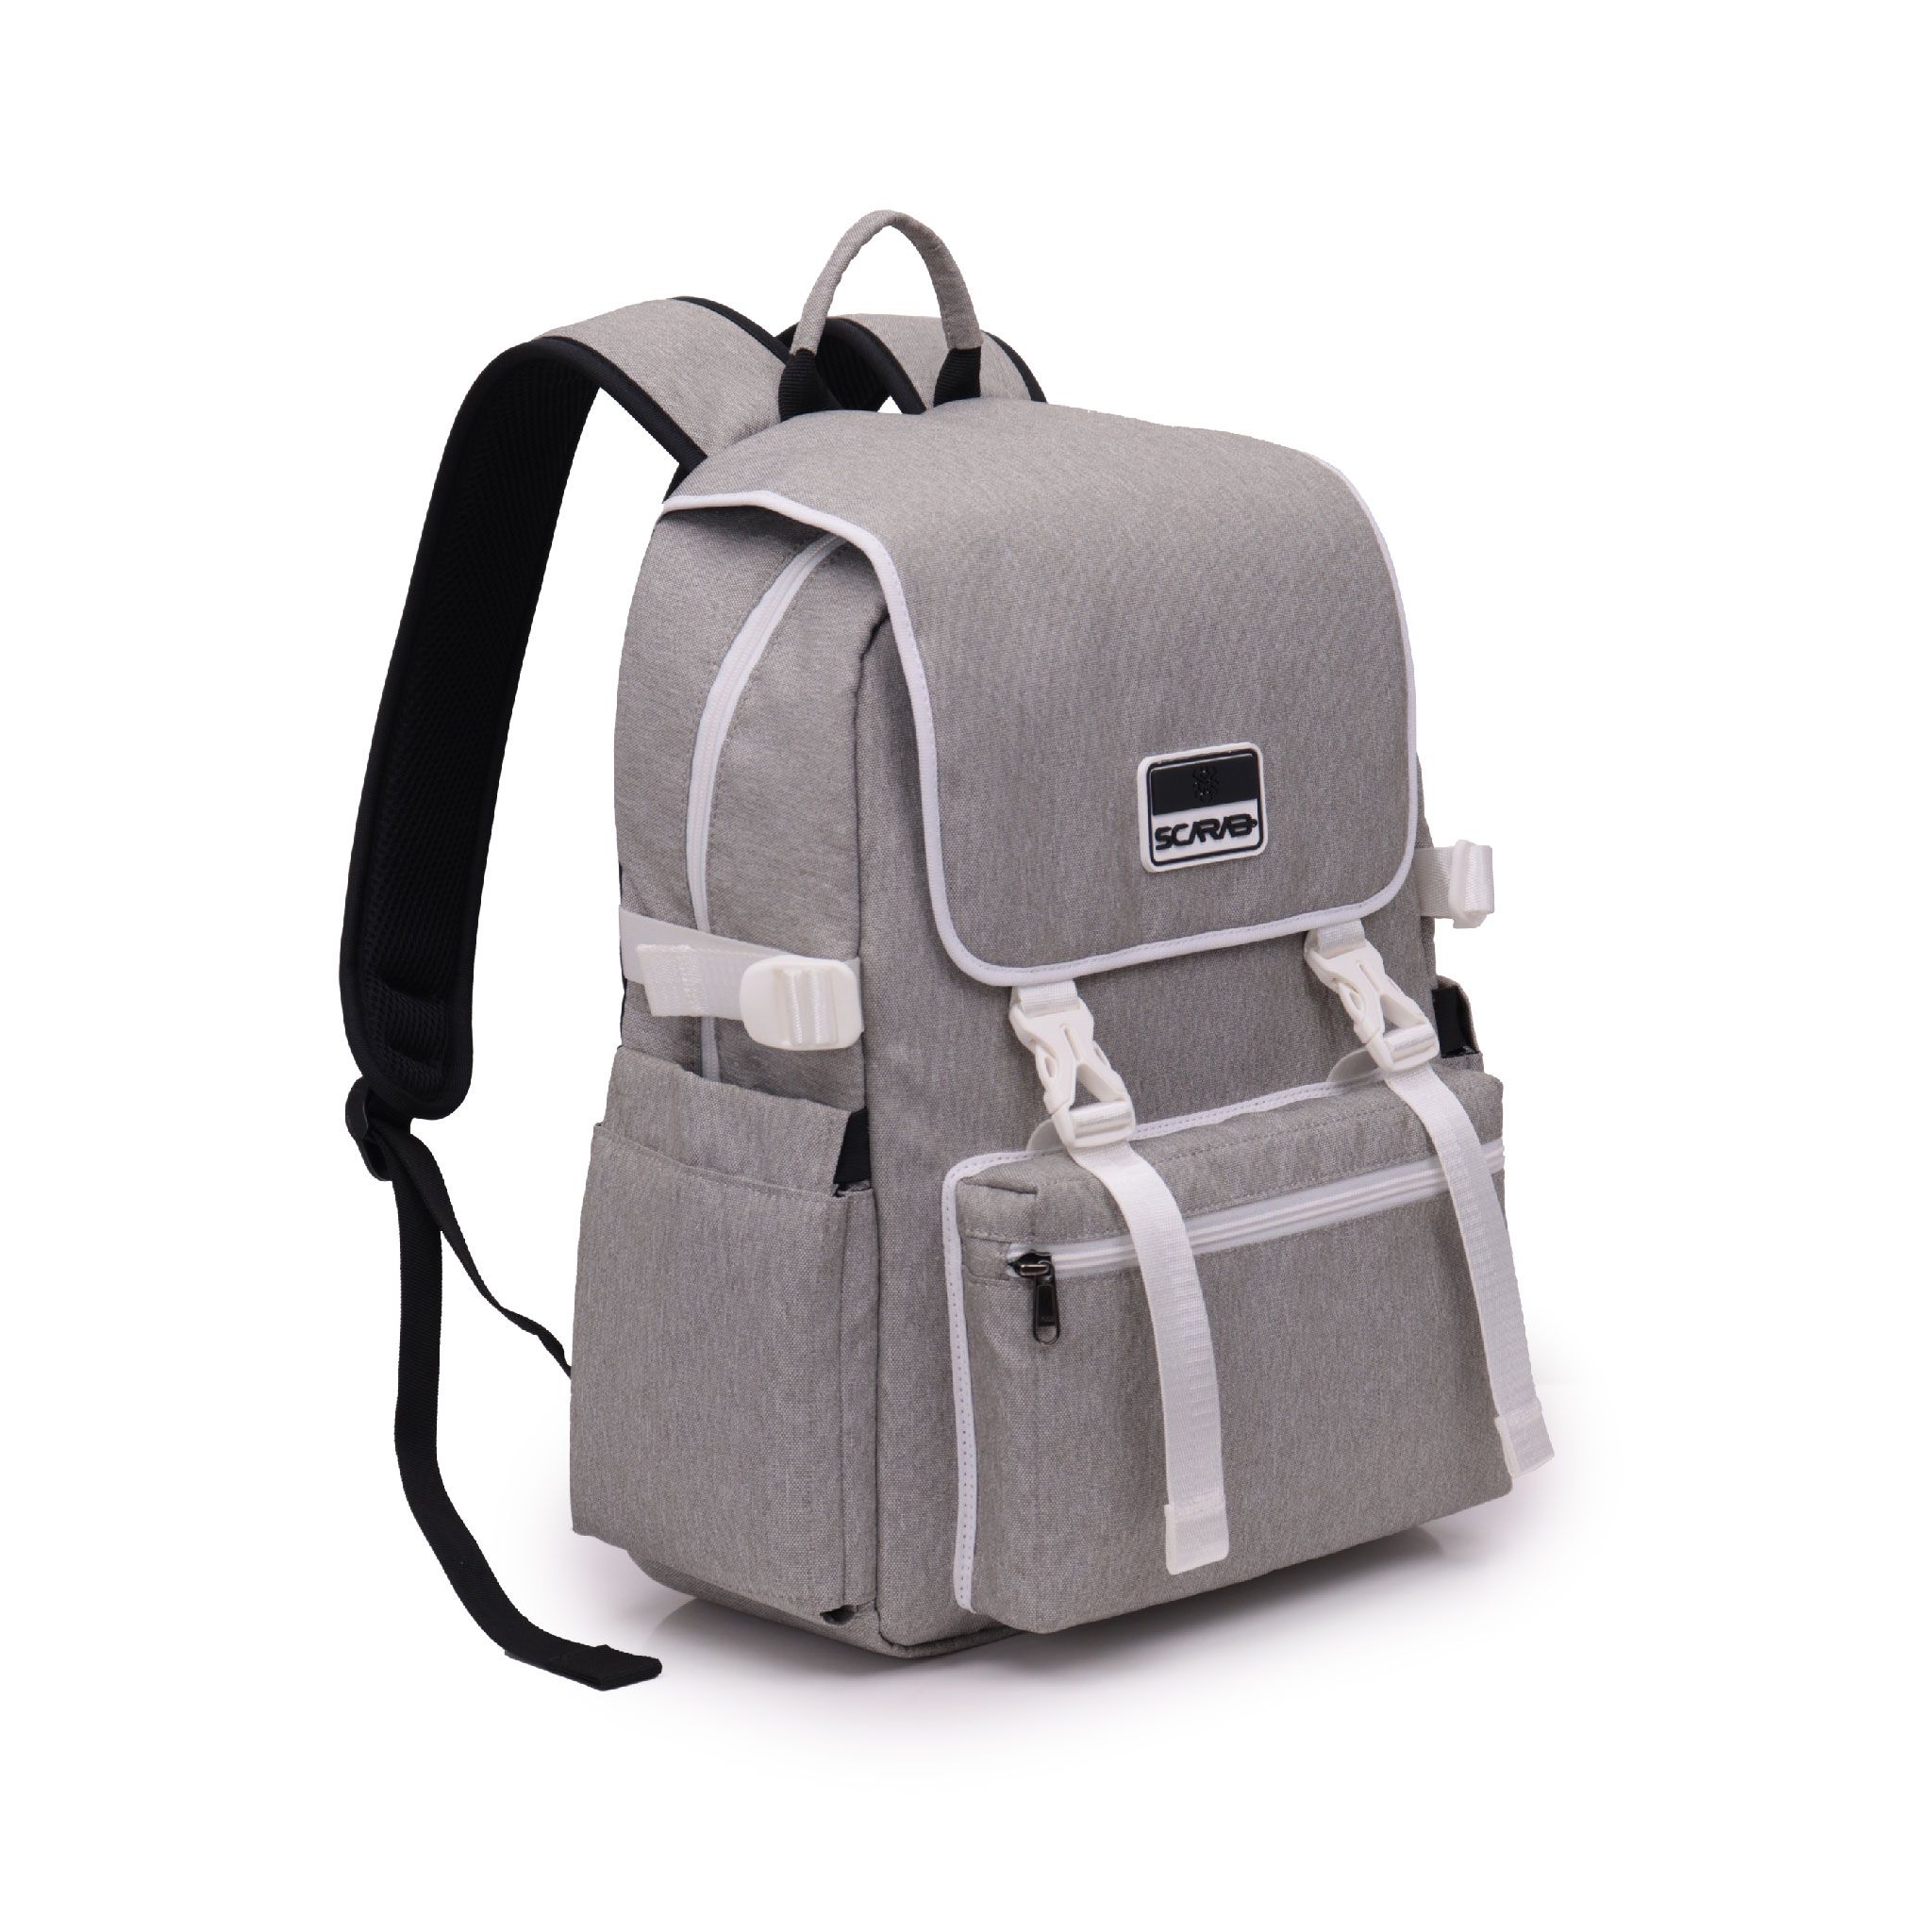  Classmate Backpack - Pale Silver 